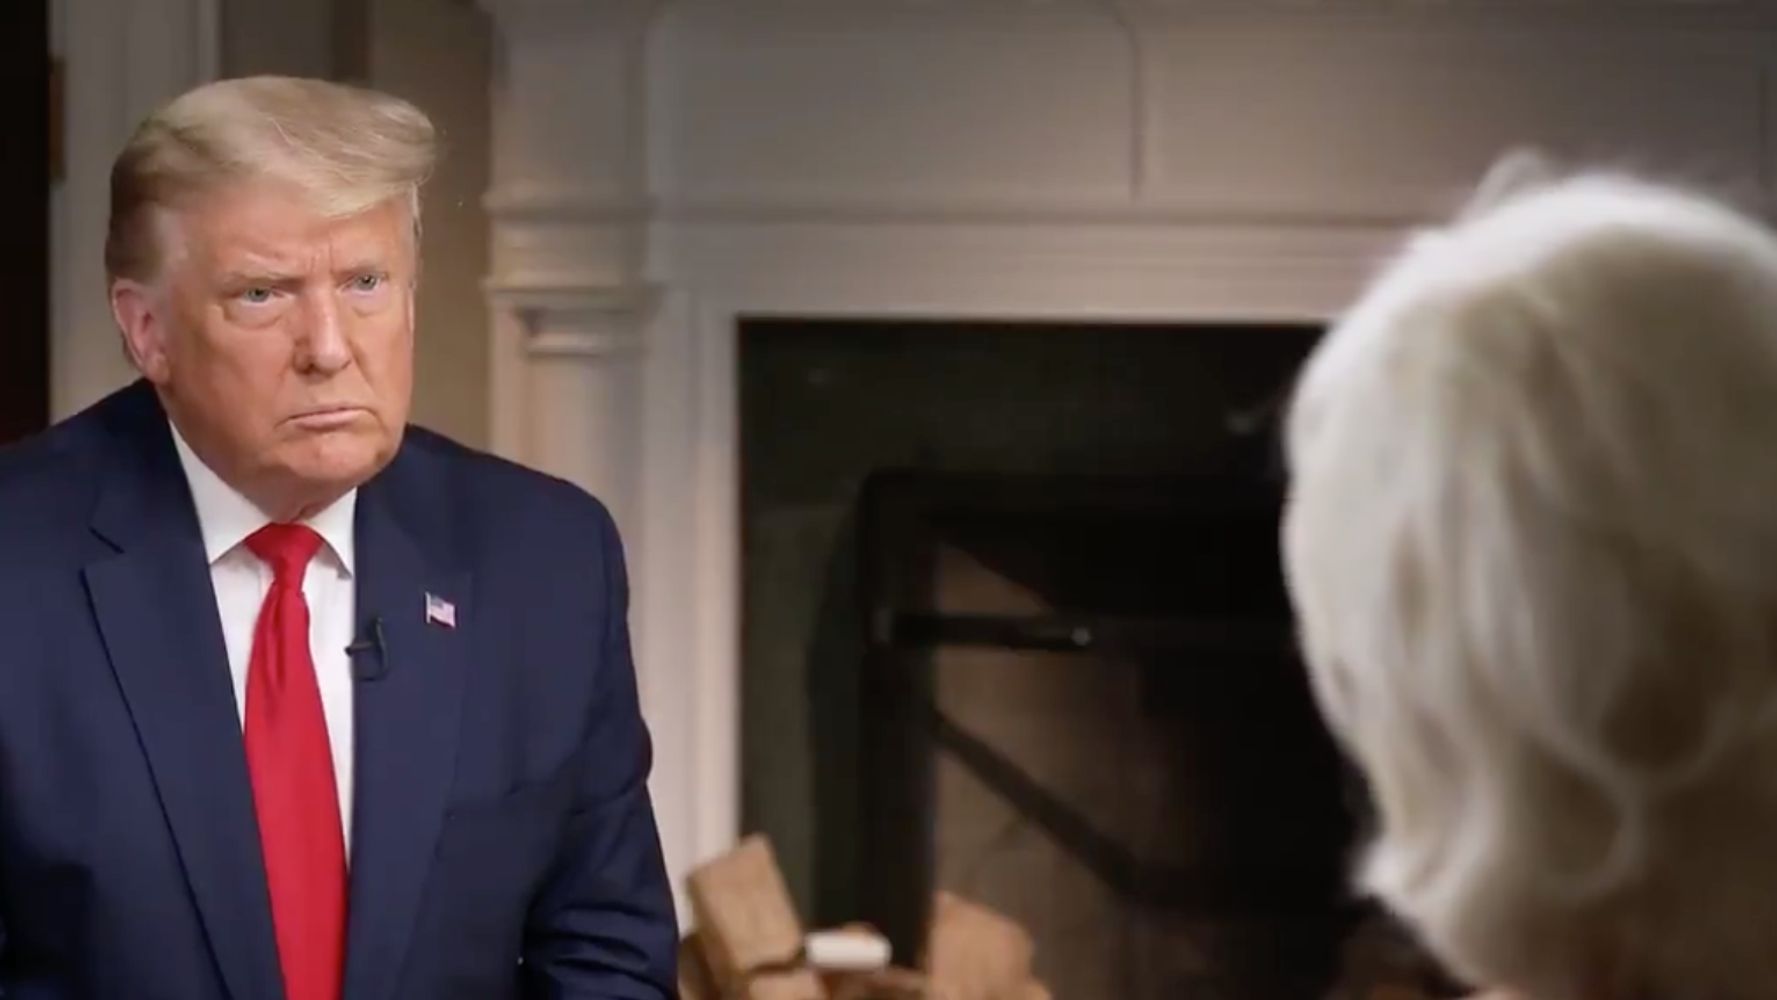 ‘That’s Enough.’ '60 Minutes' Airs Footage Of Trump Abruptly Leaving Interview